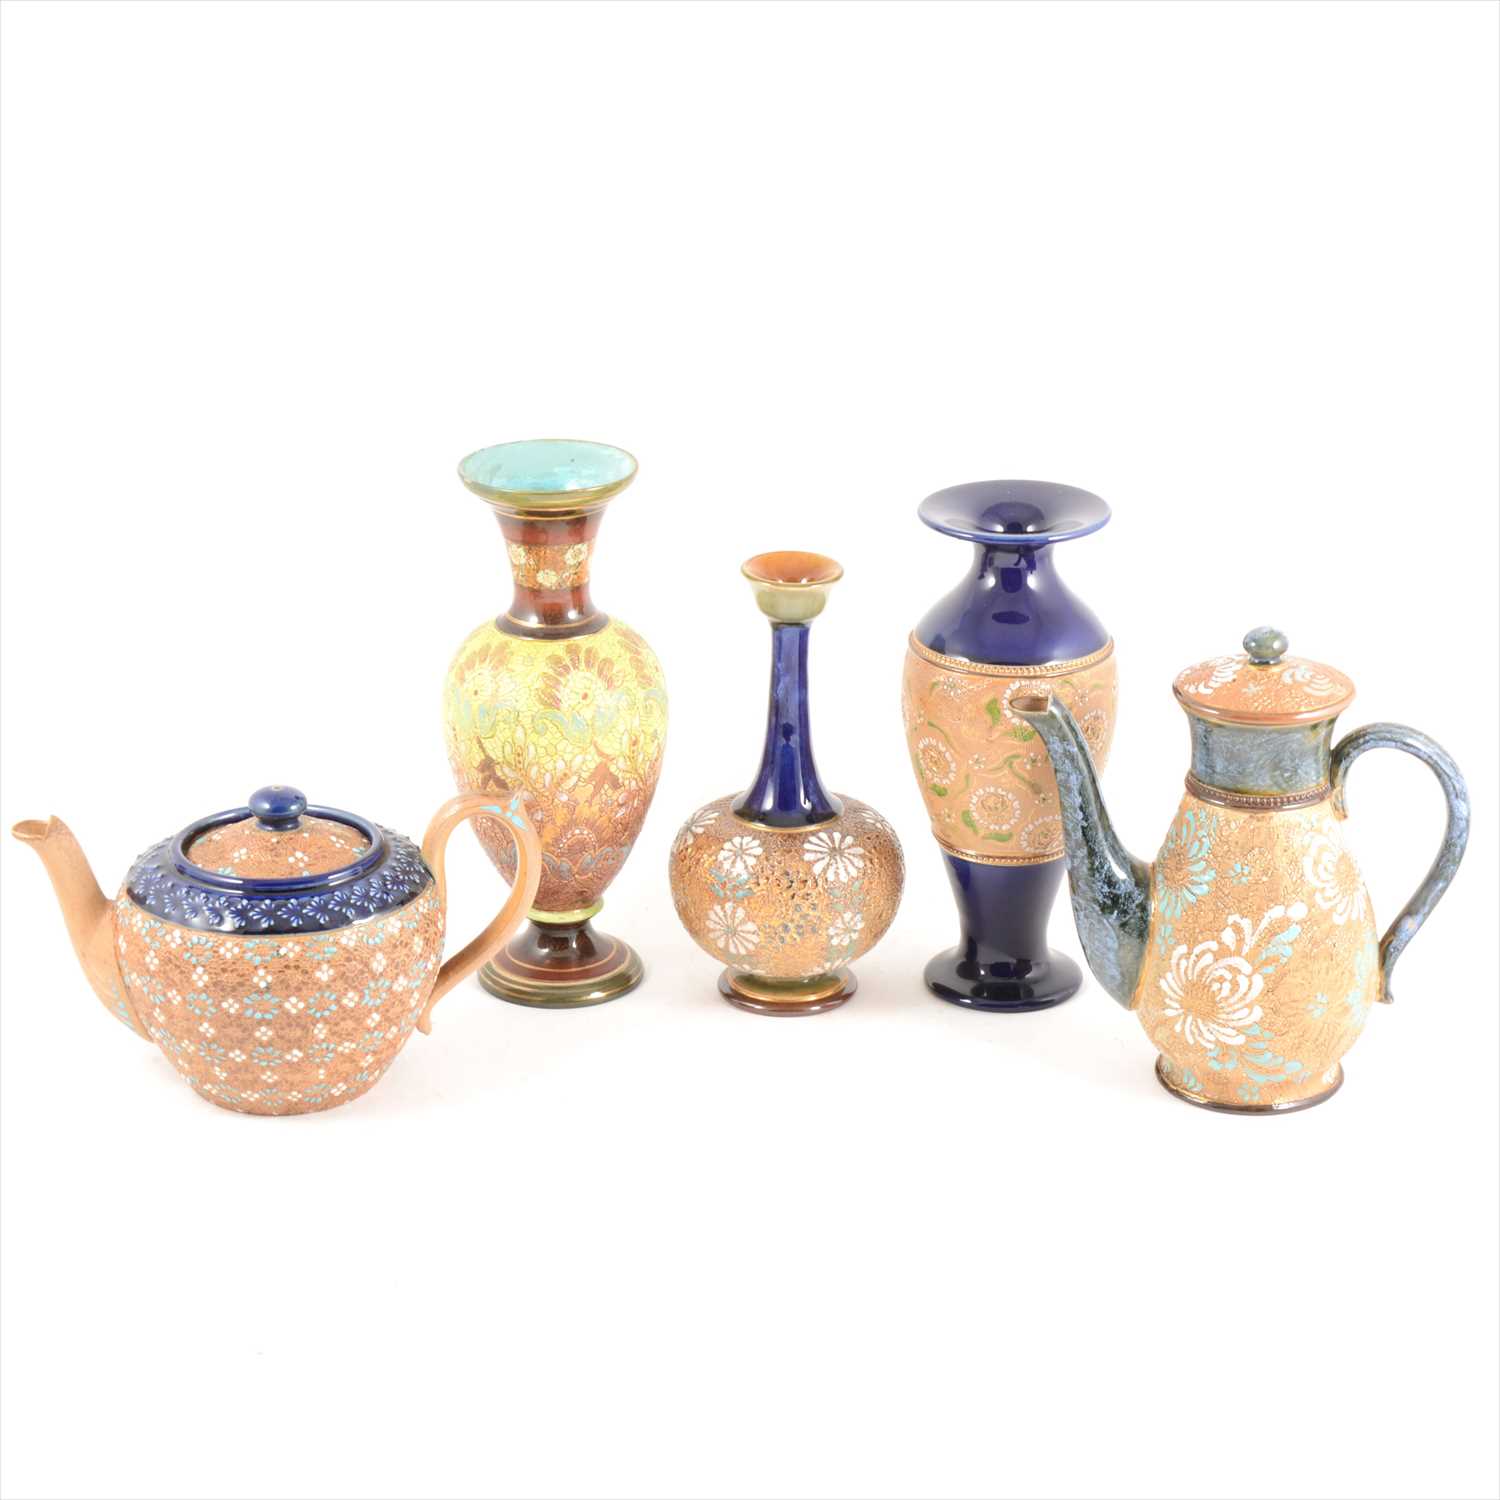 Lot 84 - Seven items of Doulton Slater's Patent stoneware, including vases, teapots, and a bowl